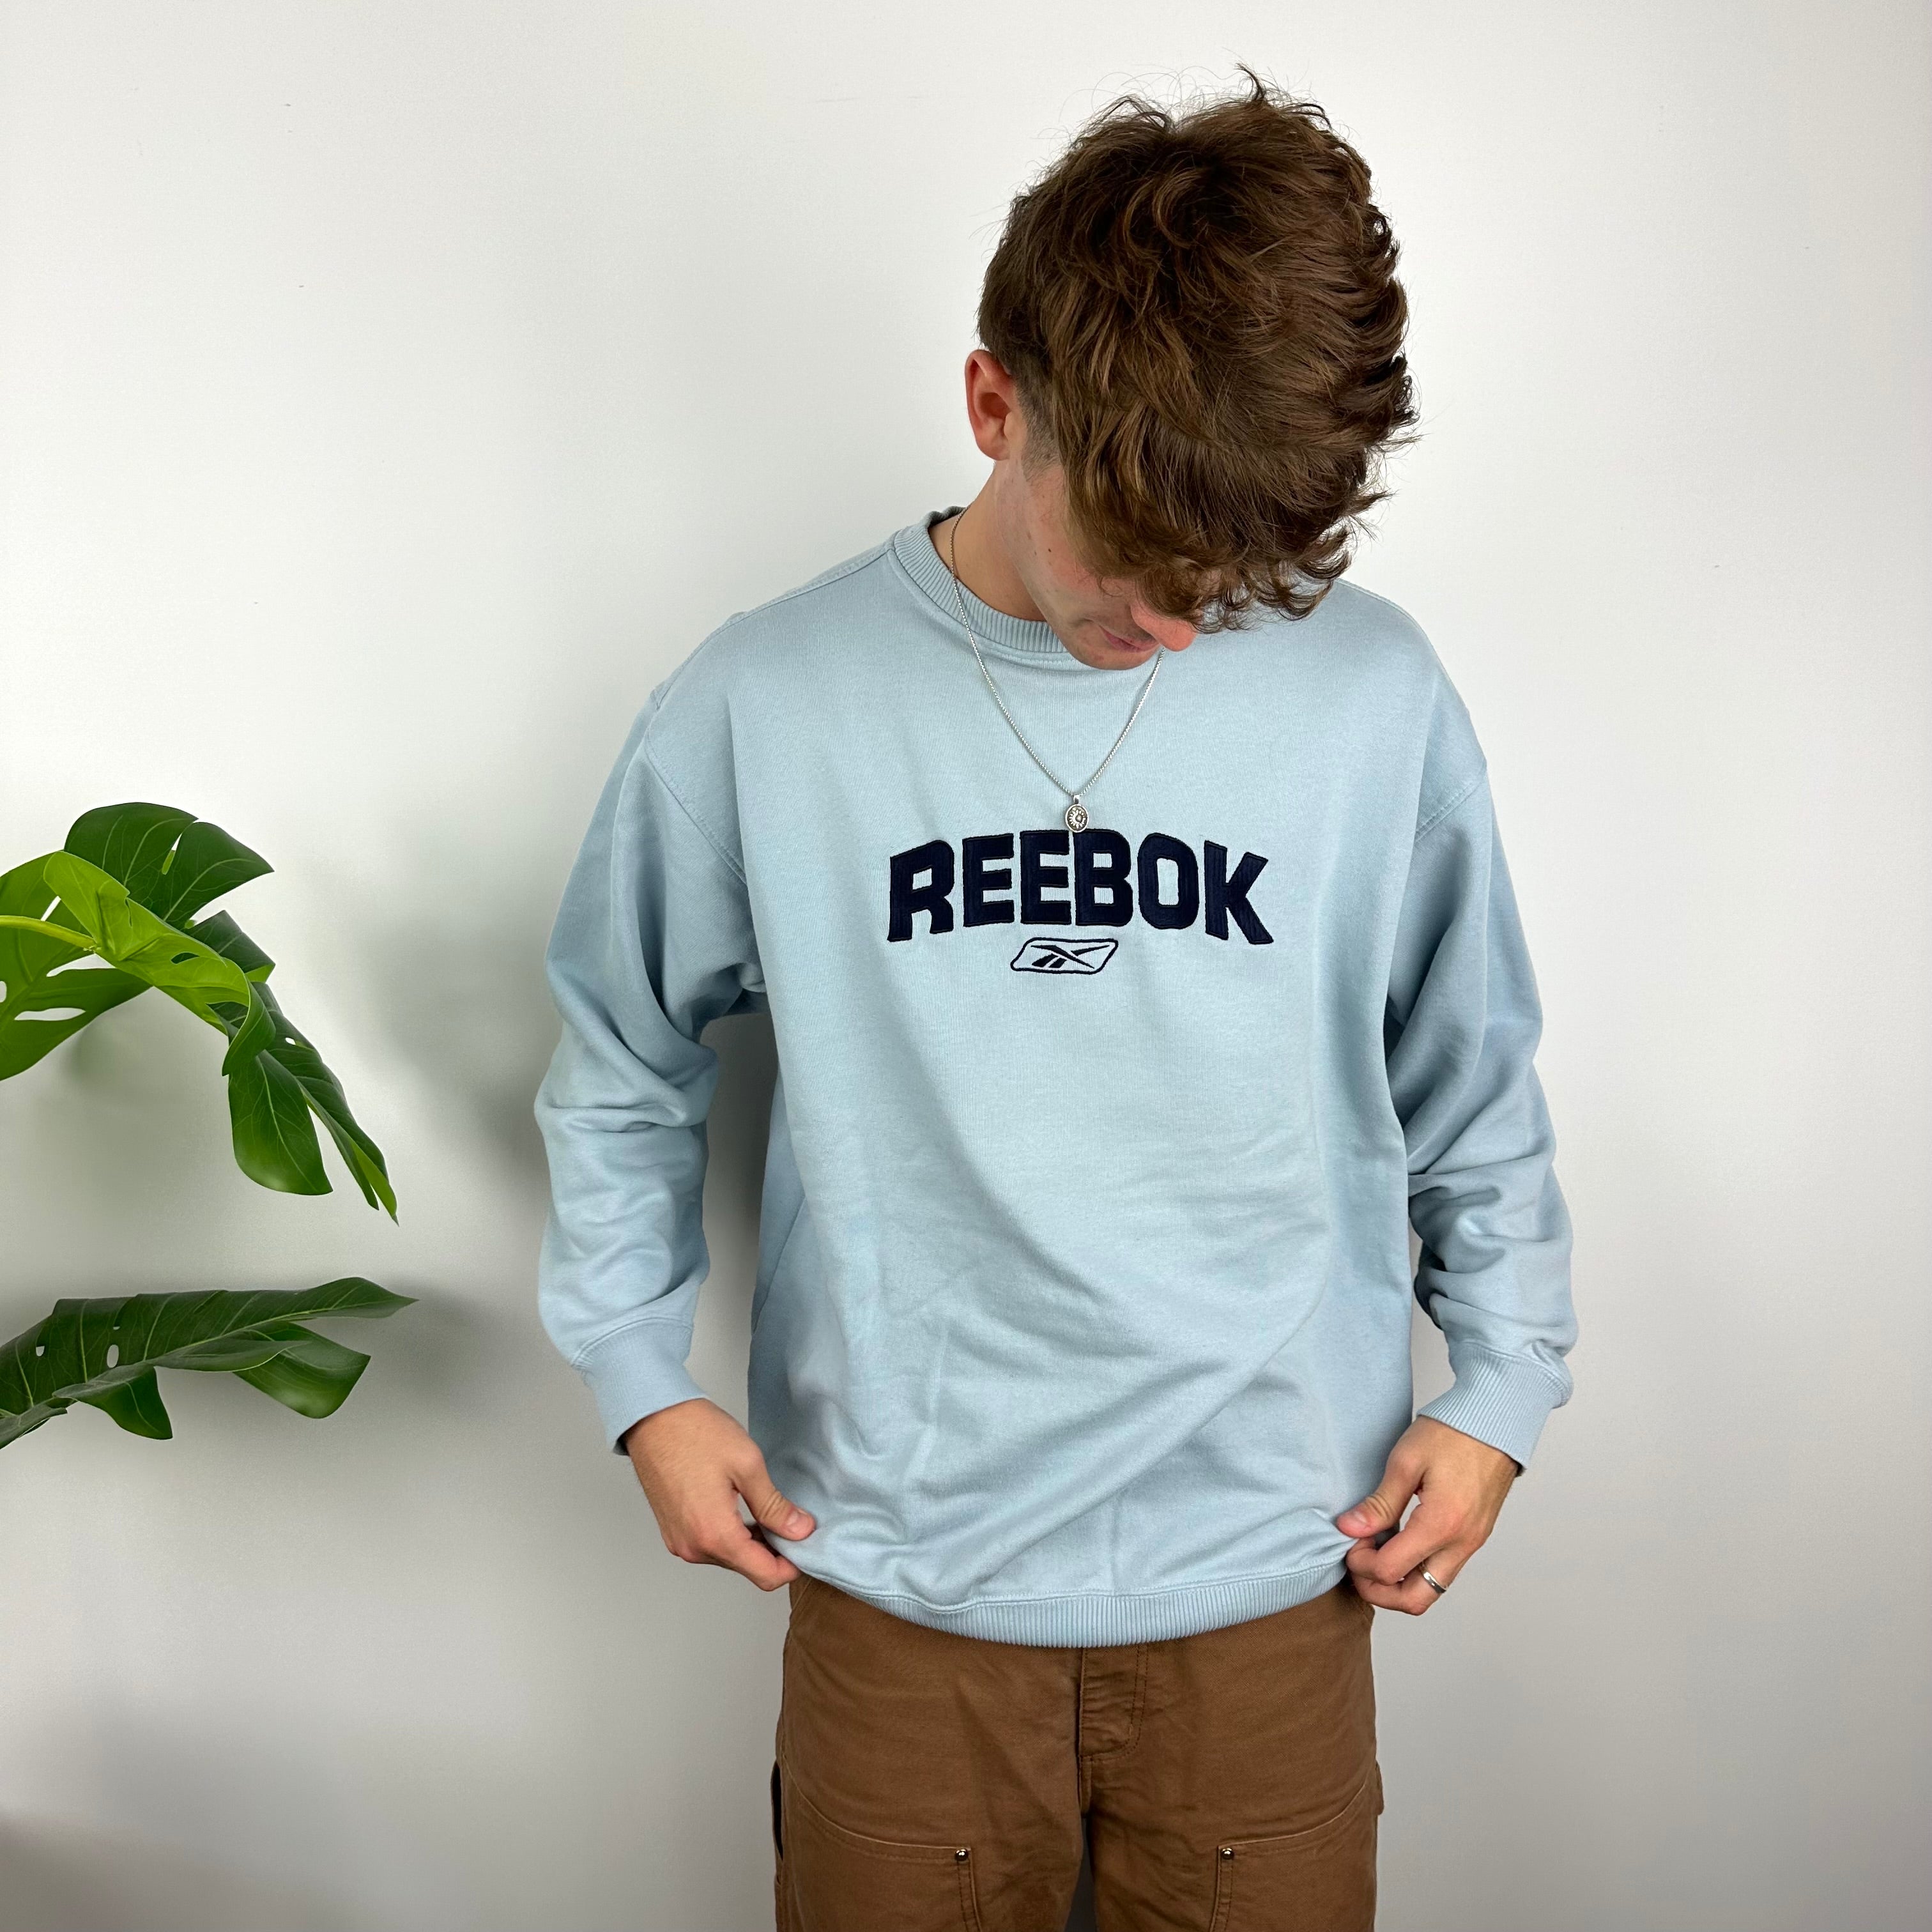 Reebok RARE Baby Blue Embroidered Spell Out Sweatshirt (XL)